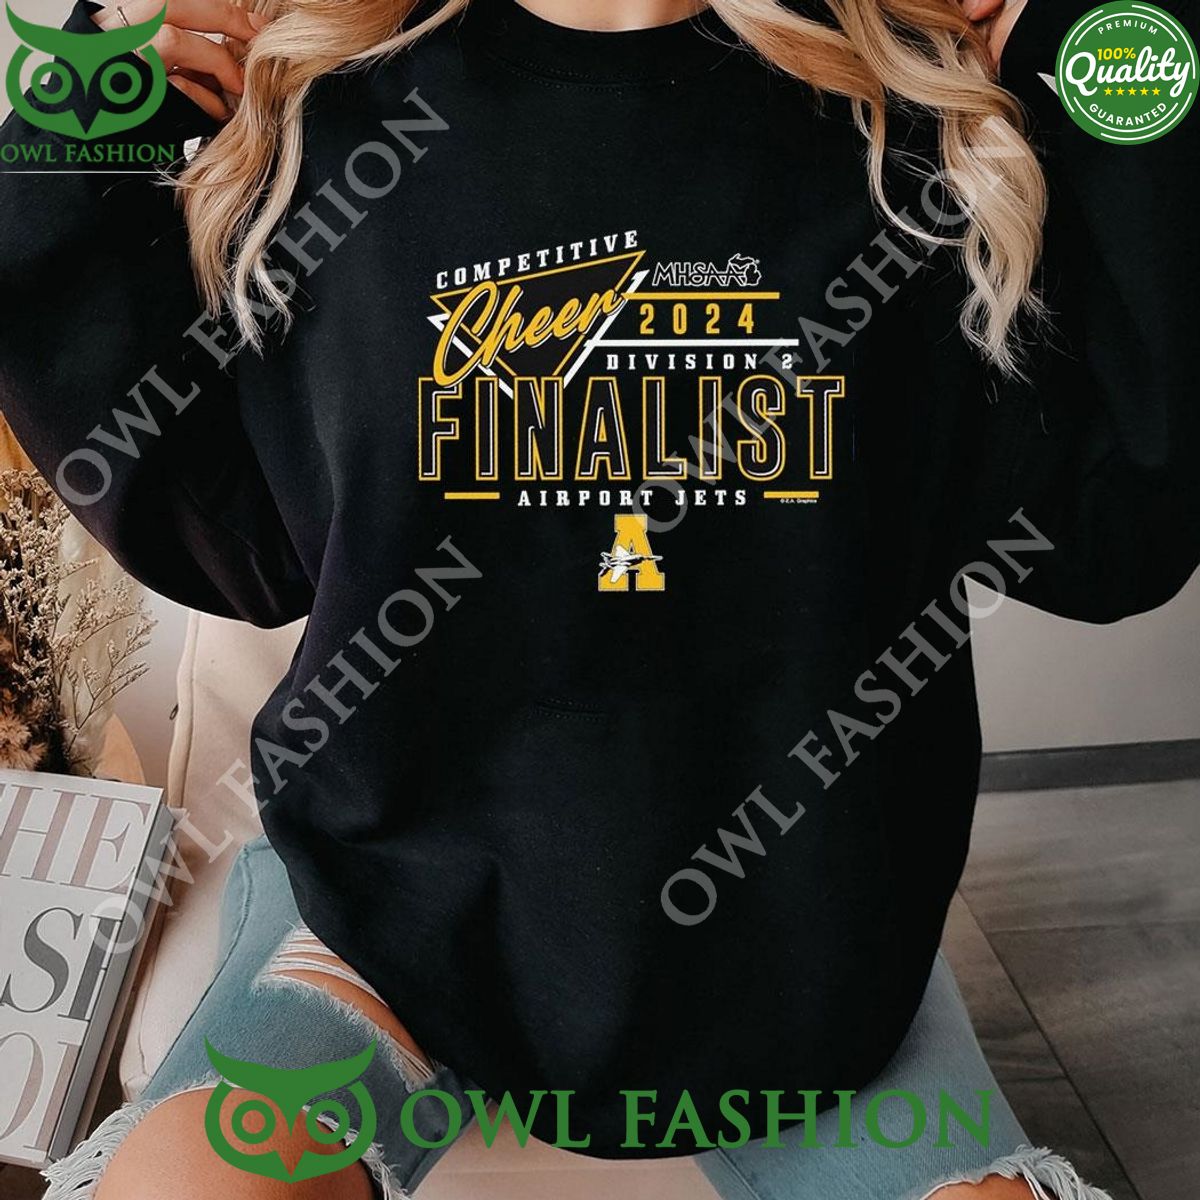 mhsaa competitive cheer 2024 division 2 finalist airport jets hoodie shirt 1 WuX3K.jpg